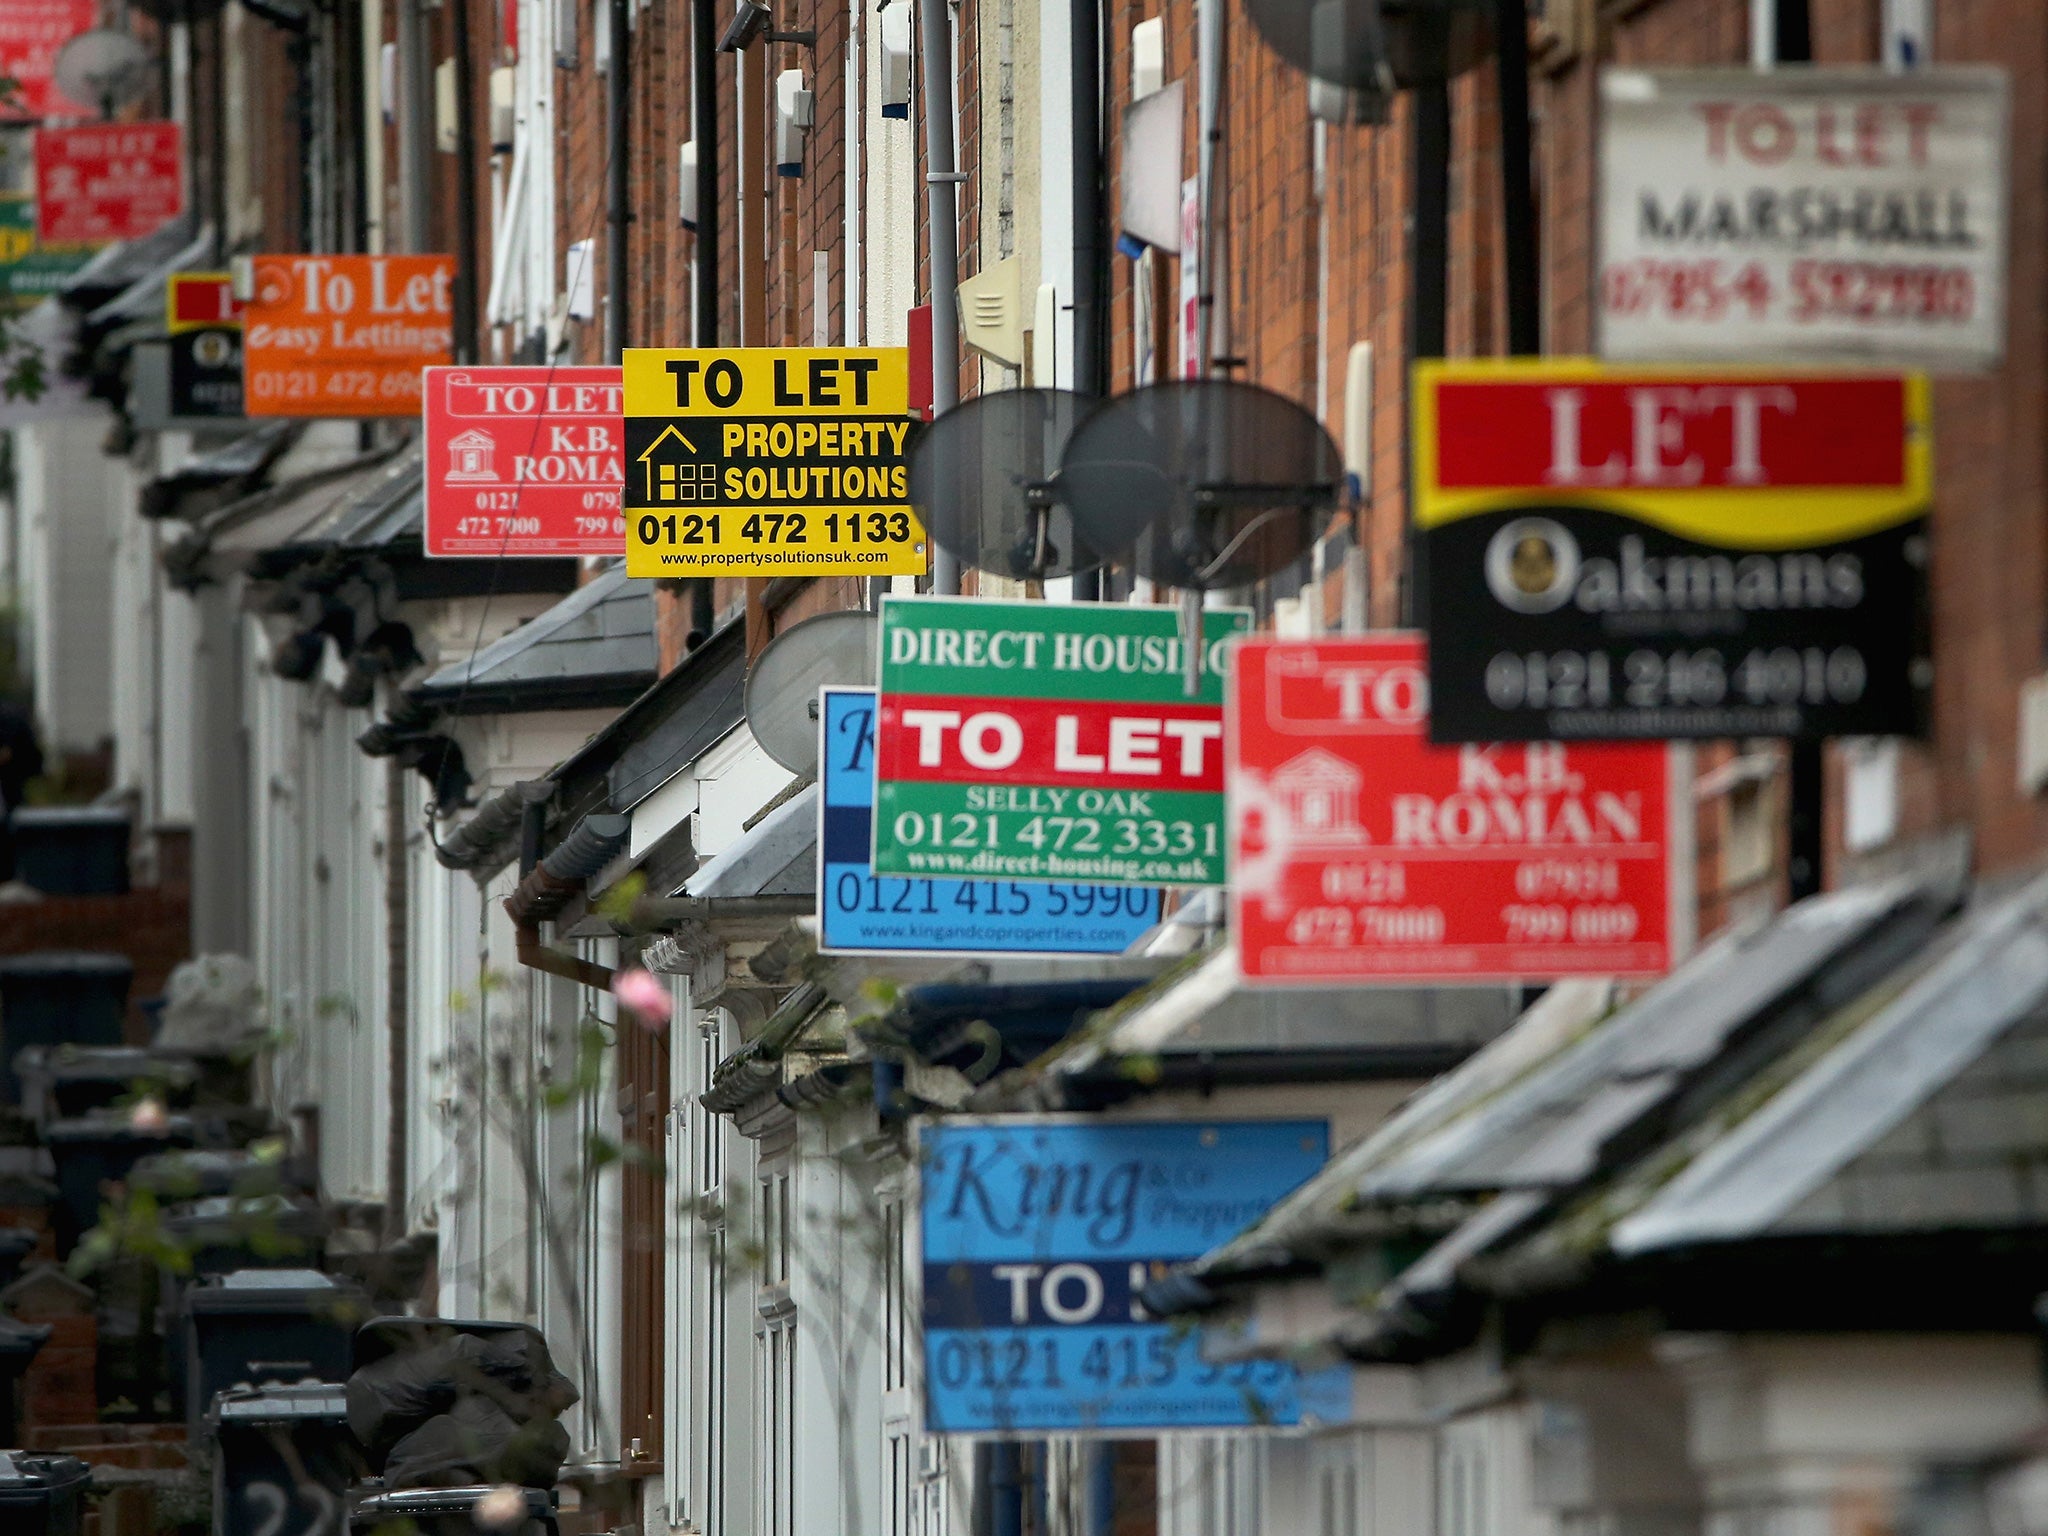 Rents for private housing in London have risen by more than a fifth since 2010